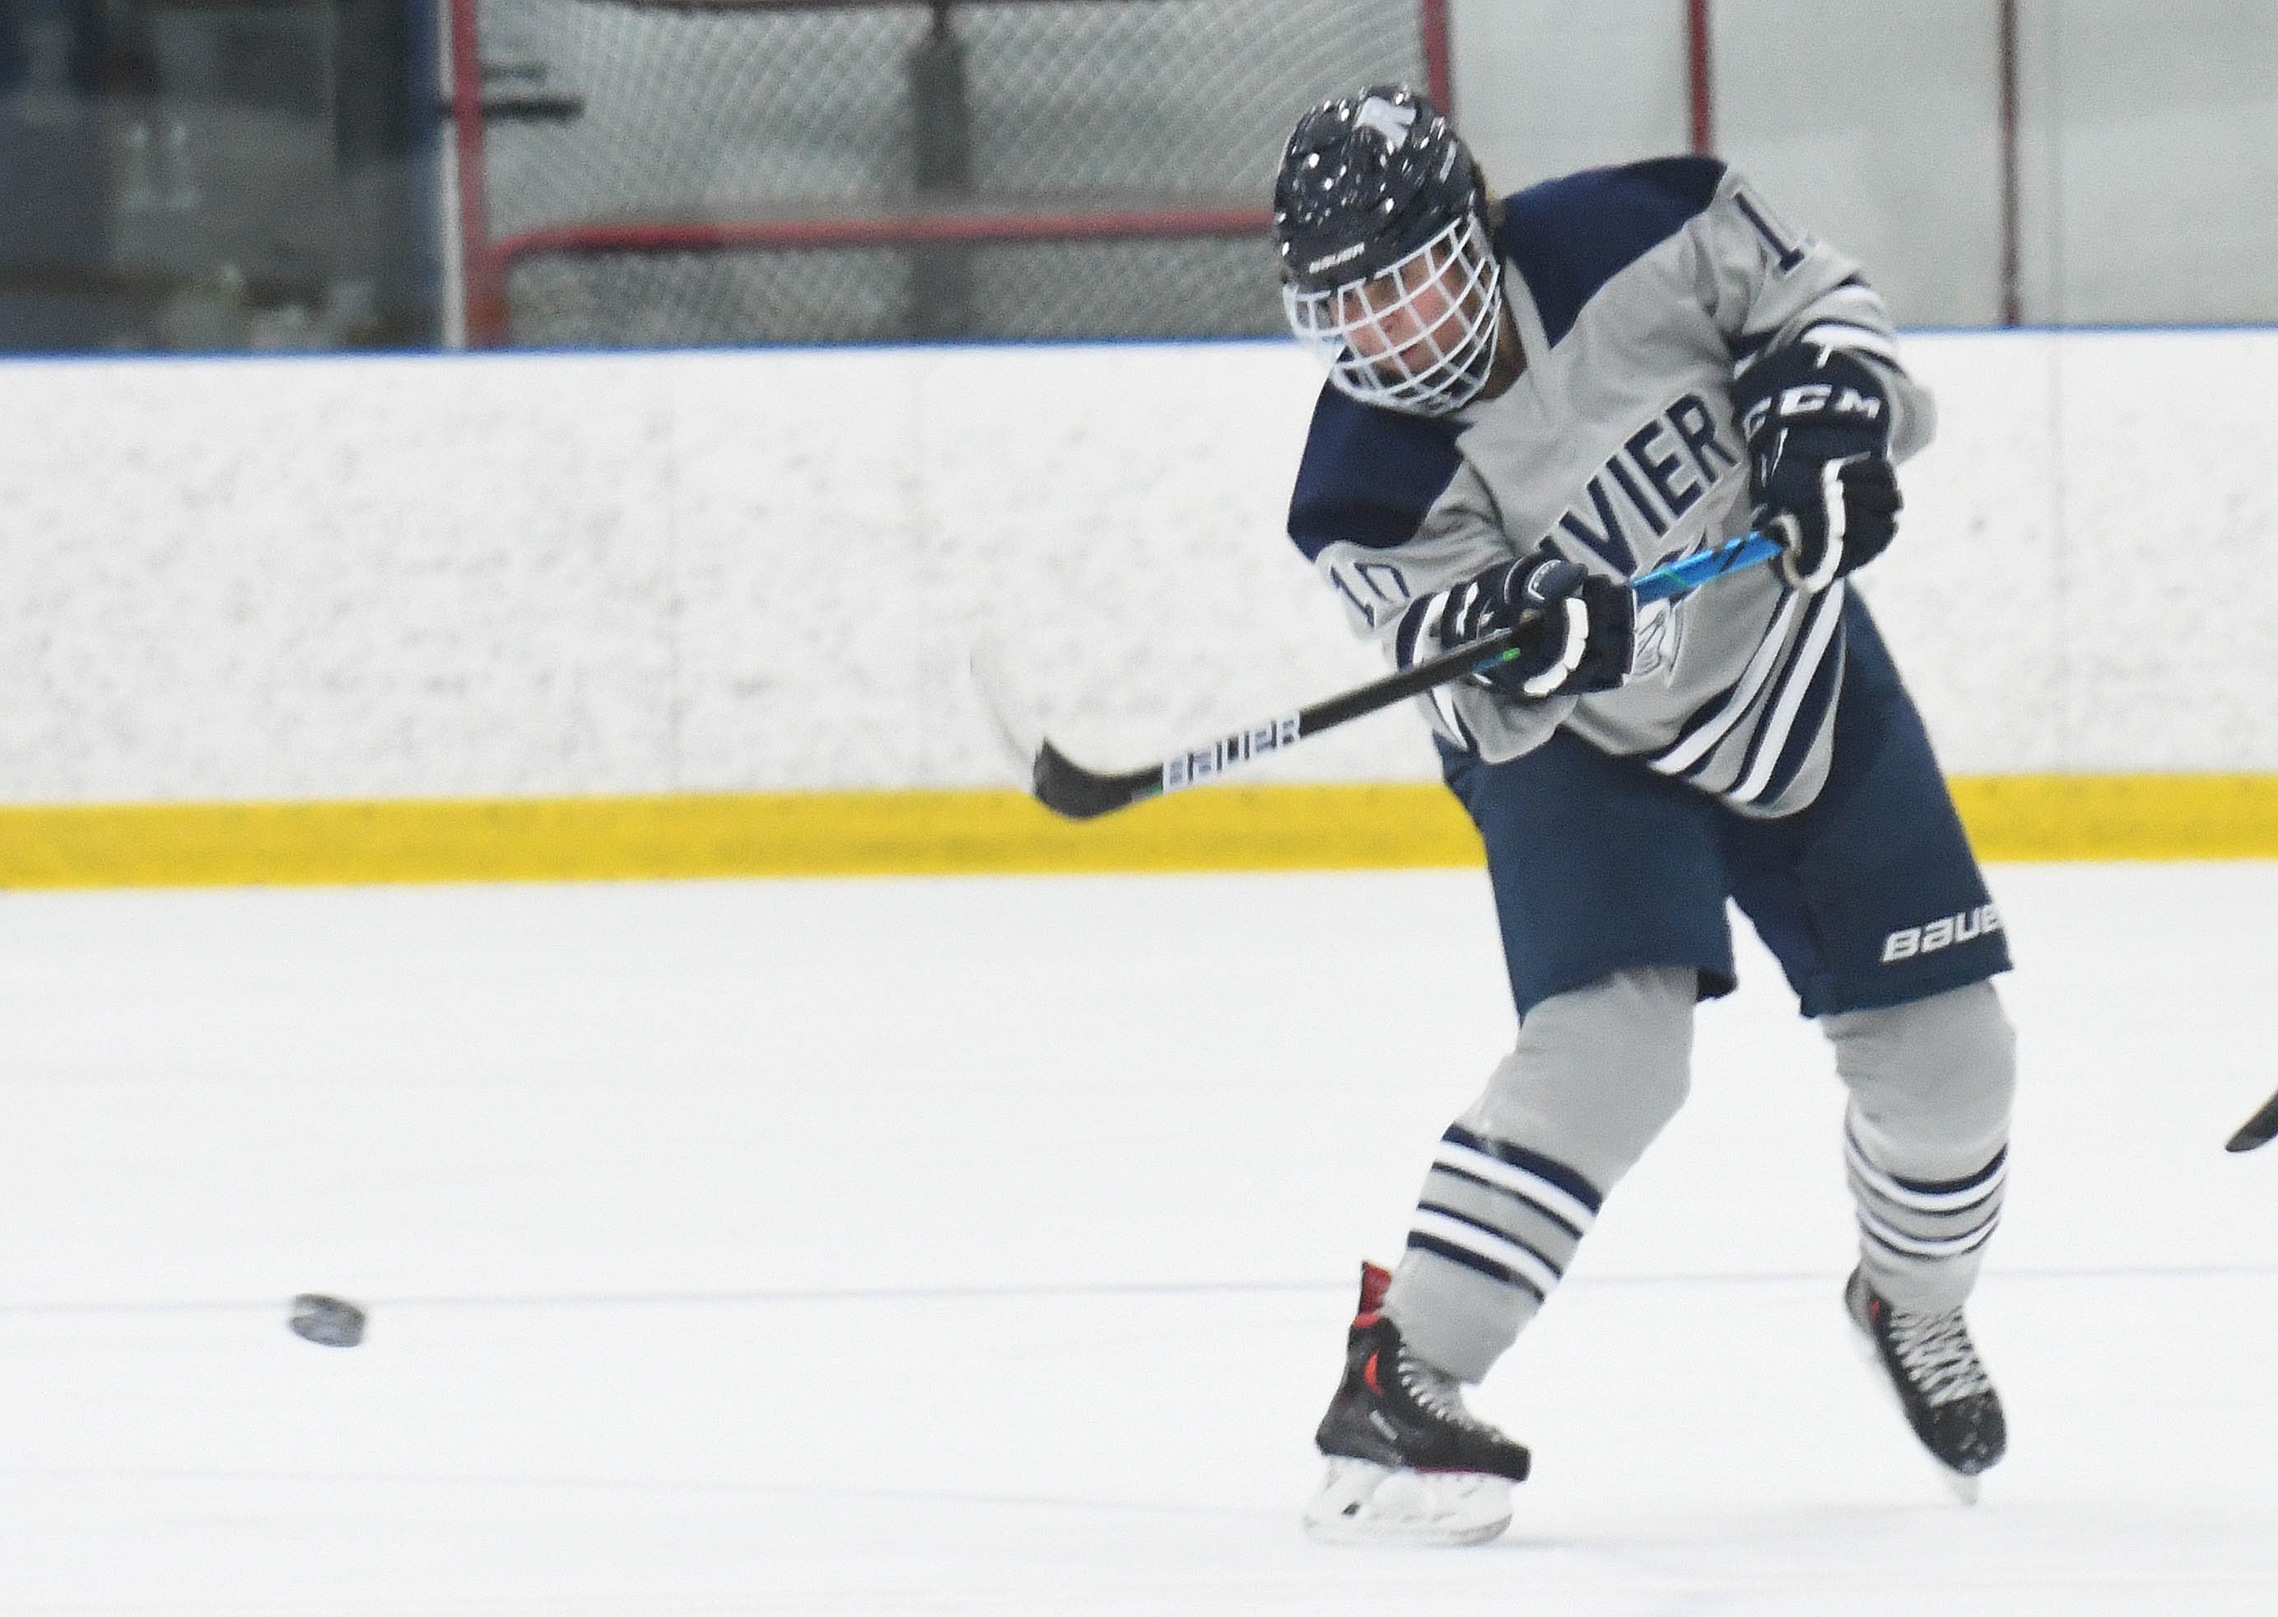 Women’s Hockey Scores in Loss to Plymouth